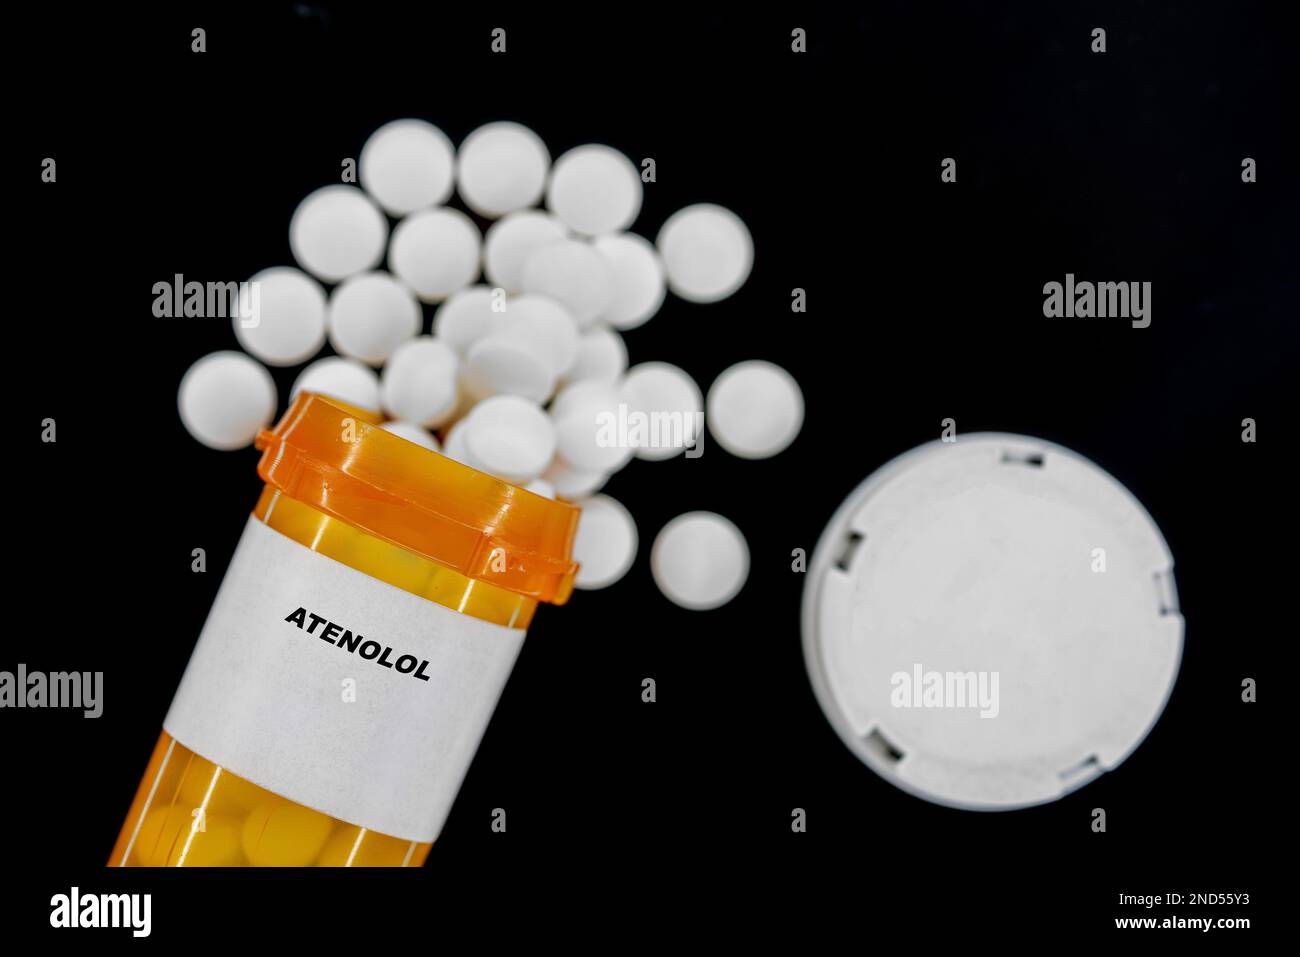 Atenolol Rx medical pills in plactic Bottle with tablets. Pills spilling out from yellow container. Stock Photo